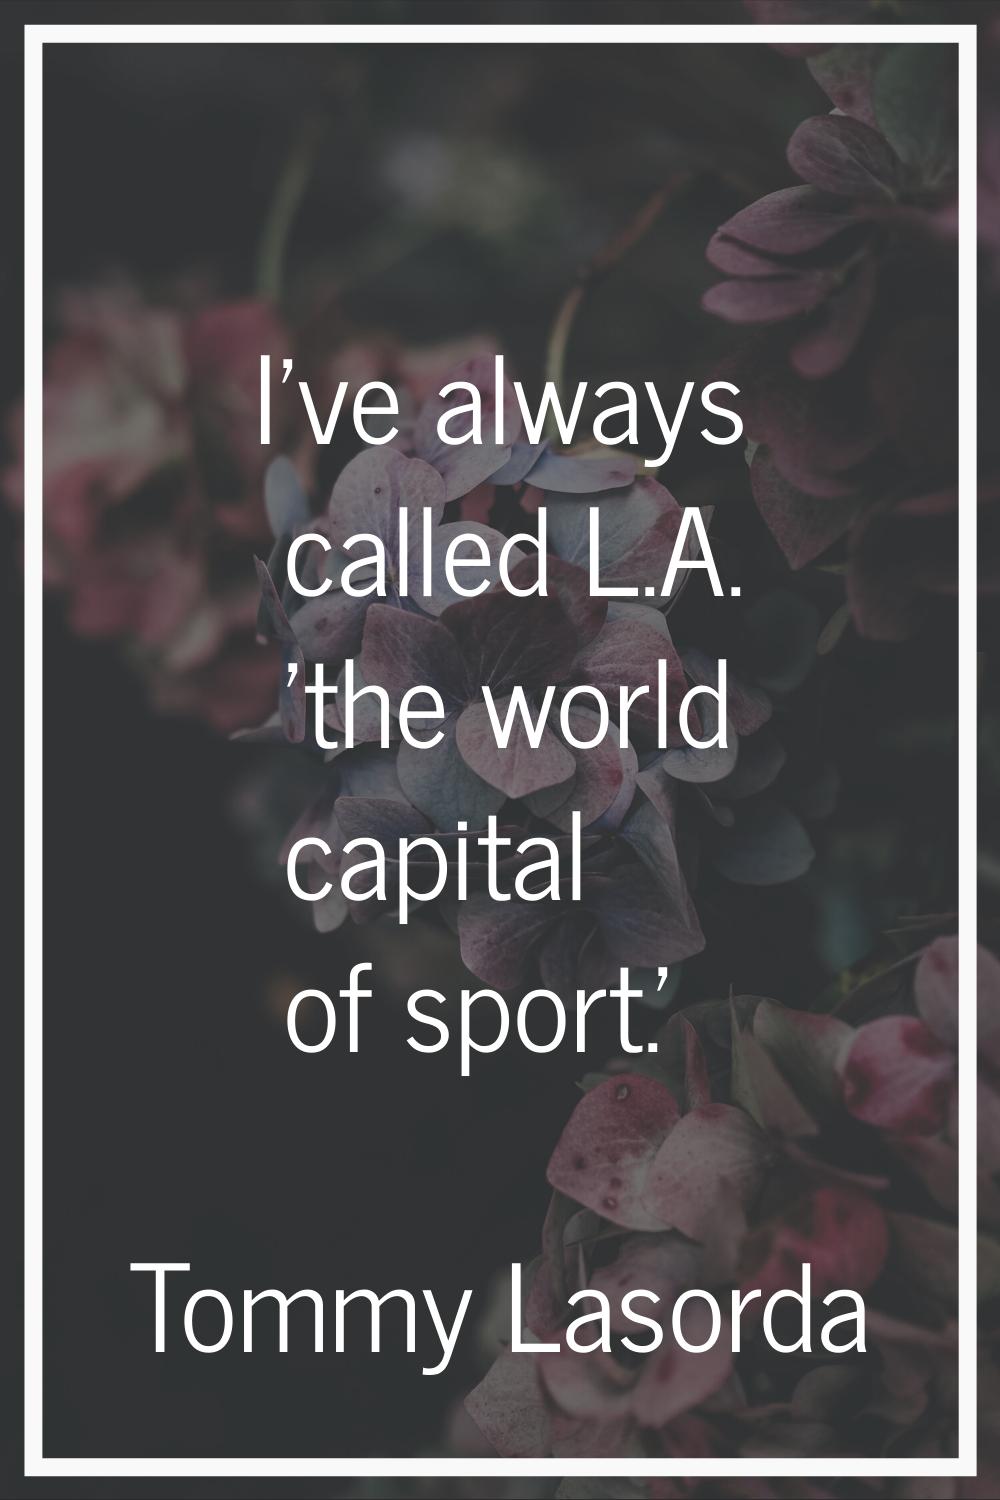 I've always called L.A. 'the world capital of sport.'